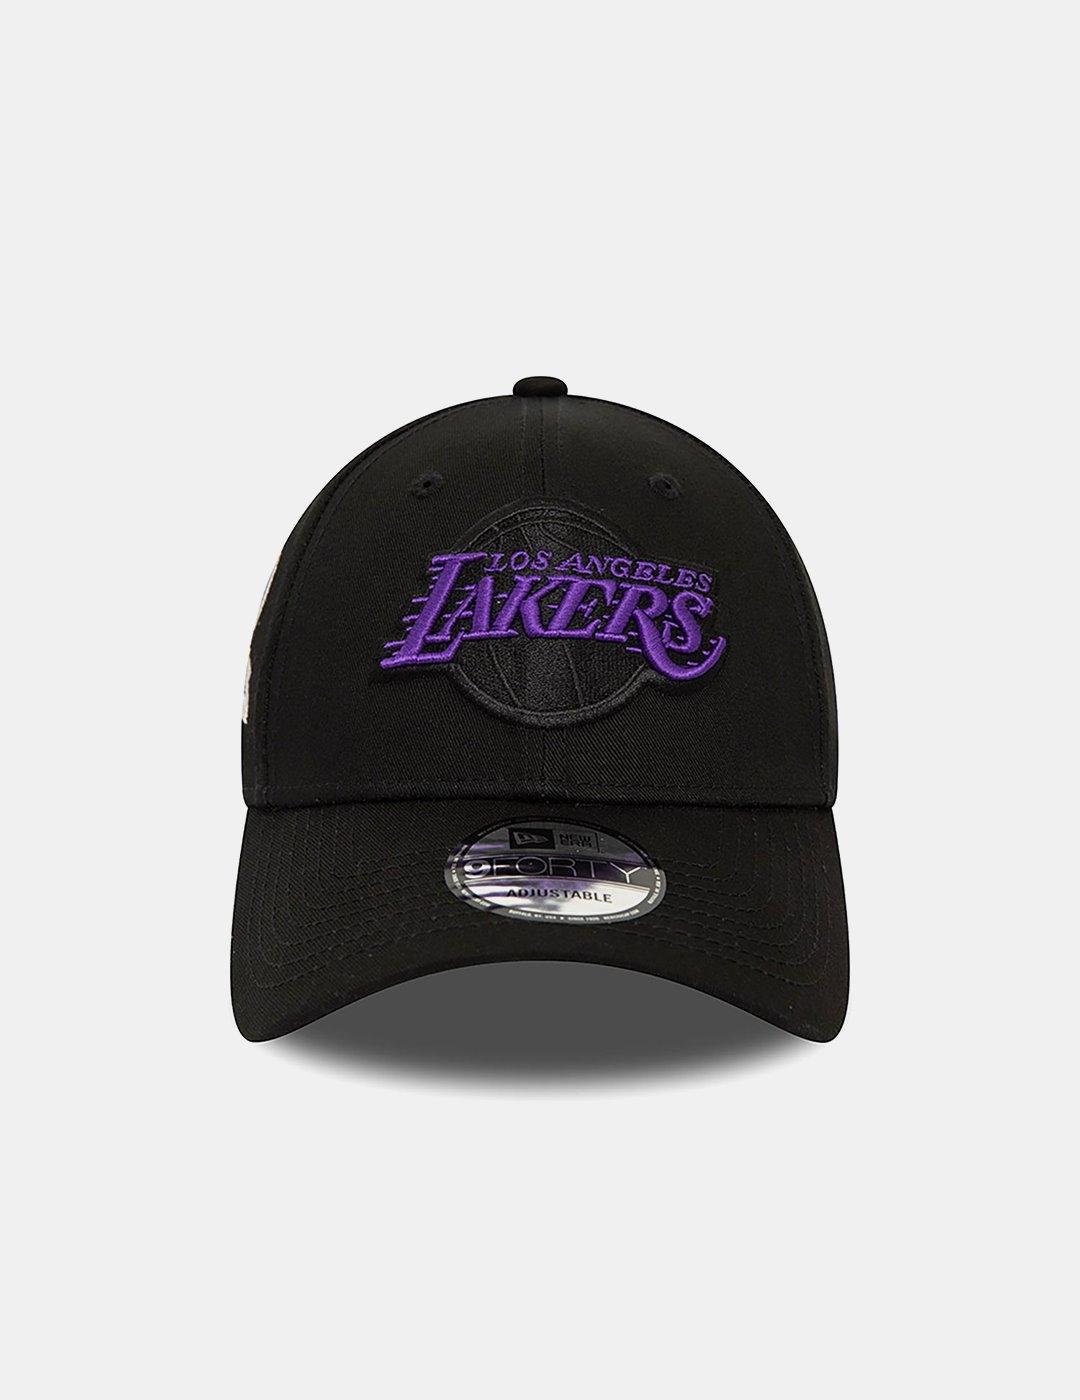 Gorra New Era 9Forty Nba Lakers Side Patch Negro